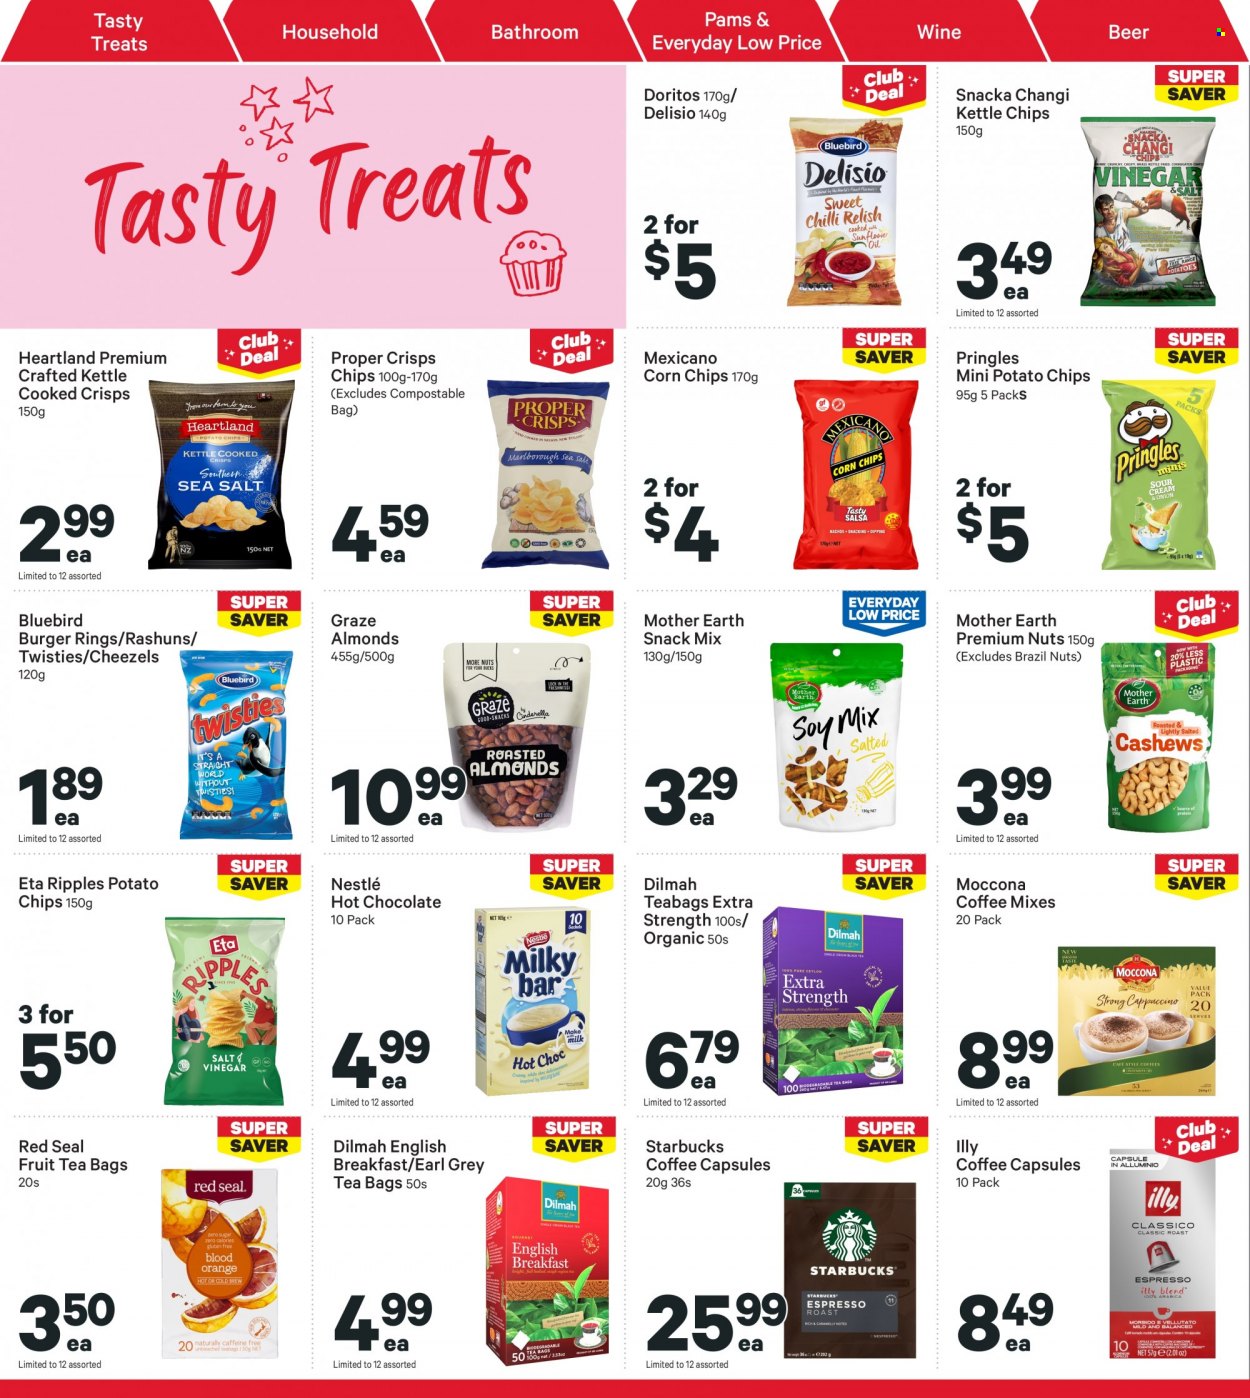 thumbnail - New World mailer - 23.01.2023 - 29.01.2023 - Sales products - hamburger, Nestlé, snack, Mother Earth, Doritos, potato chips, Pringles, chips, corn chips, Heartland, Mexicano, Bluebird, Delisio, almonds, Graze, brazil nuts, hot chocolate, tea bags, Moccona, coffee capsules, Starbucks, Illy, wine, beer. Page 26.